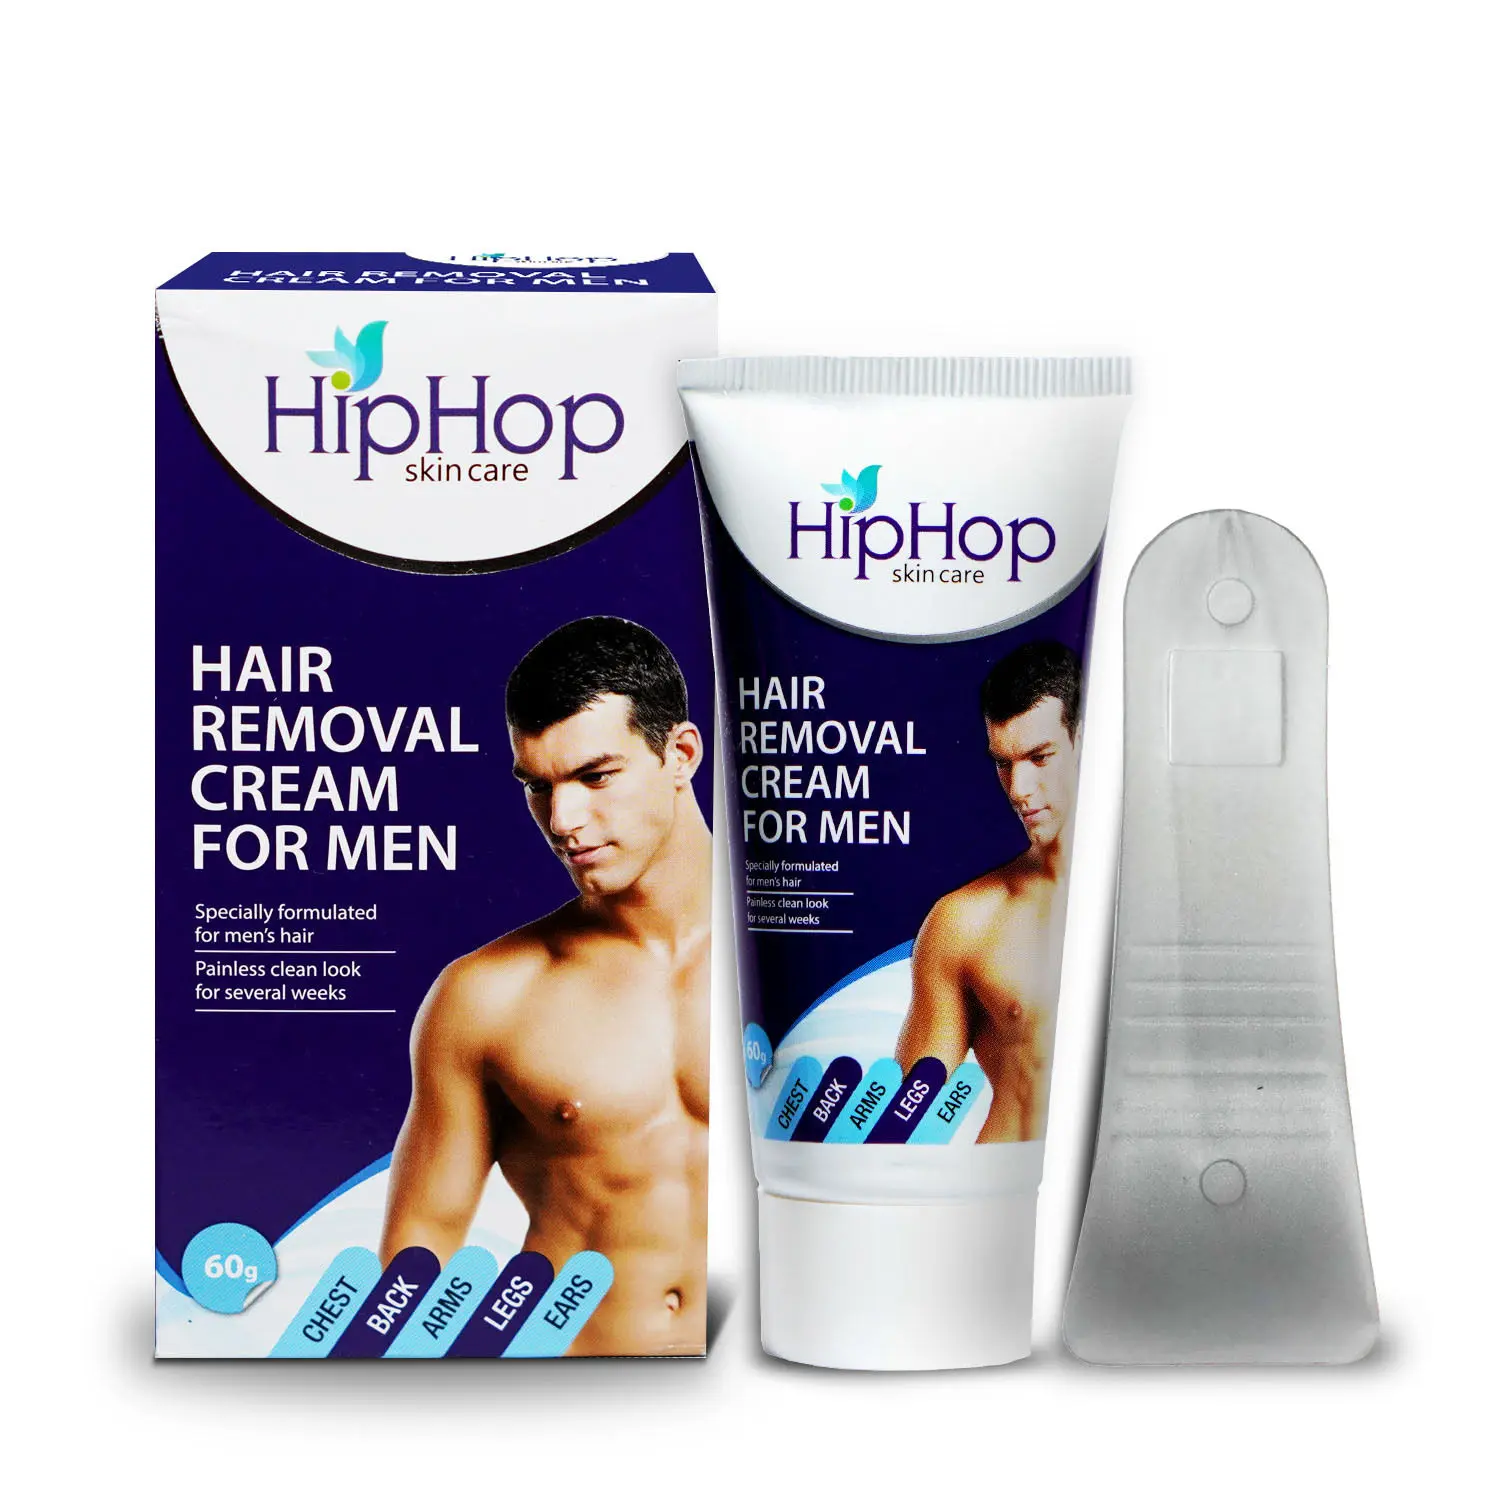 HipHop Skincare Hair Removal Cream for Men, Painless Hair Removal, Infused with Aloe Vera, For All Skin Types (60 GM)